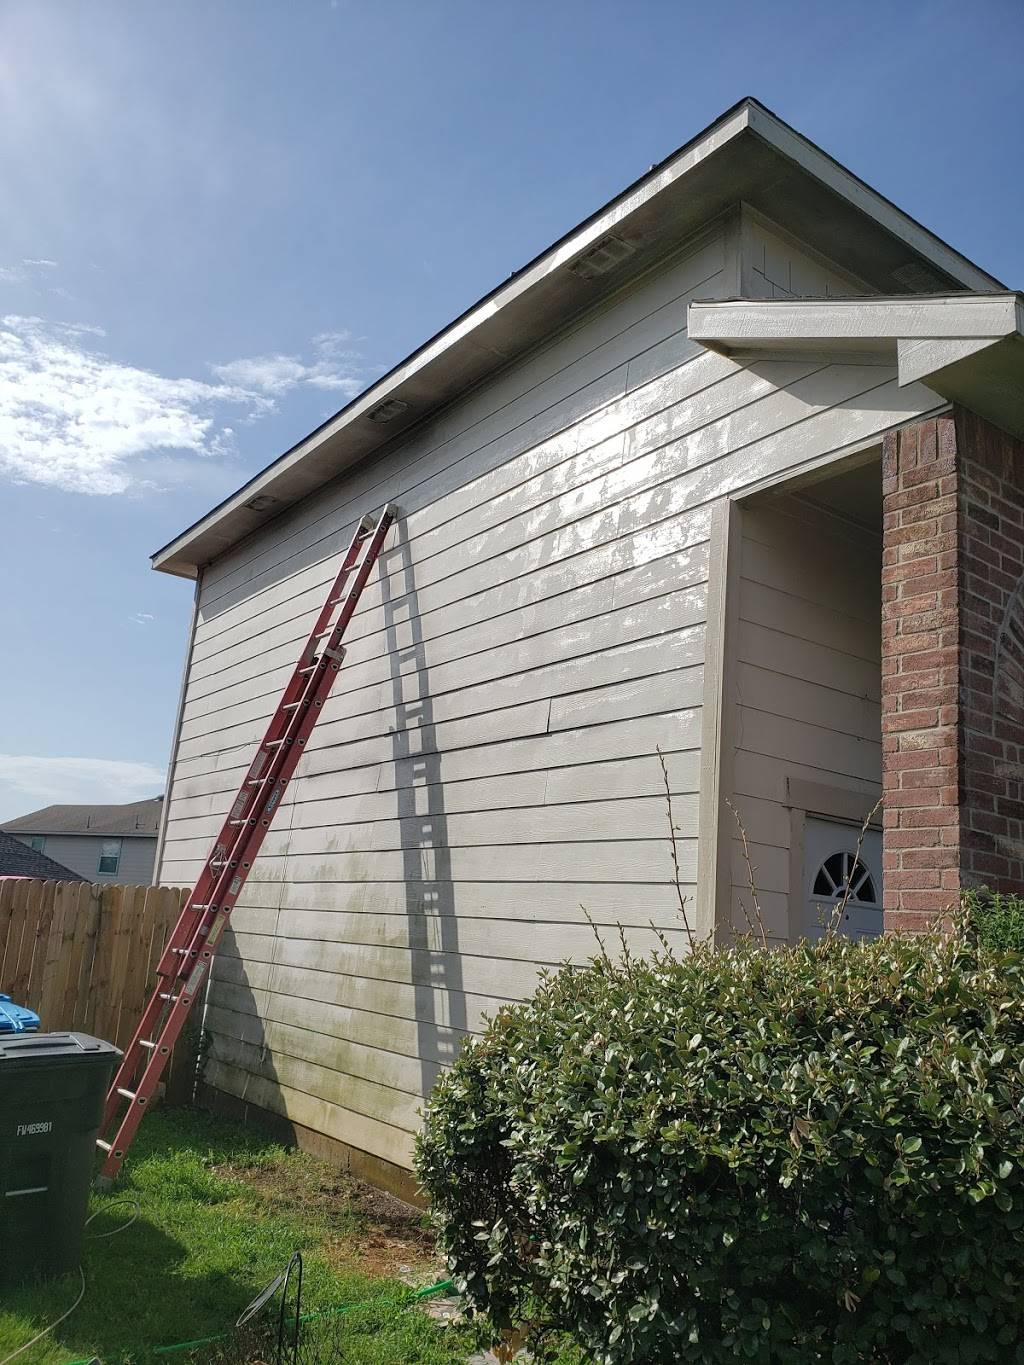 Triple Js Landscaping & Painting Services | 2049 Beacon Way, Fort Worth, TX 76140, USA | Phone: (817) 253-8737